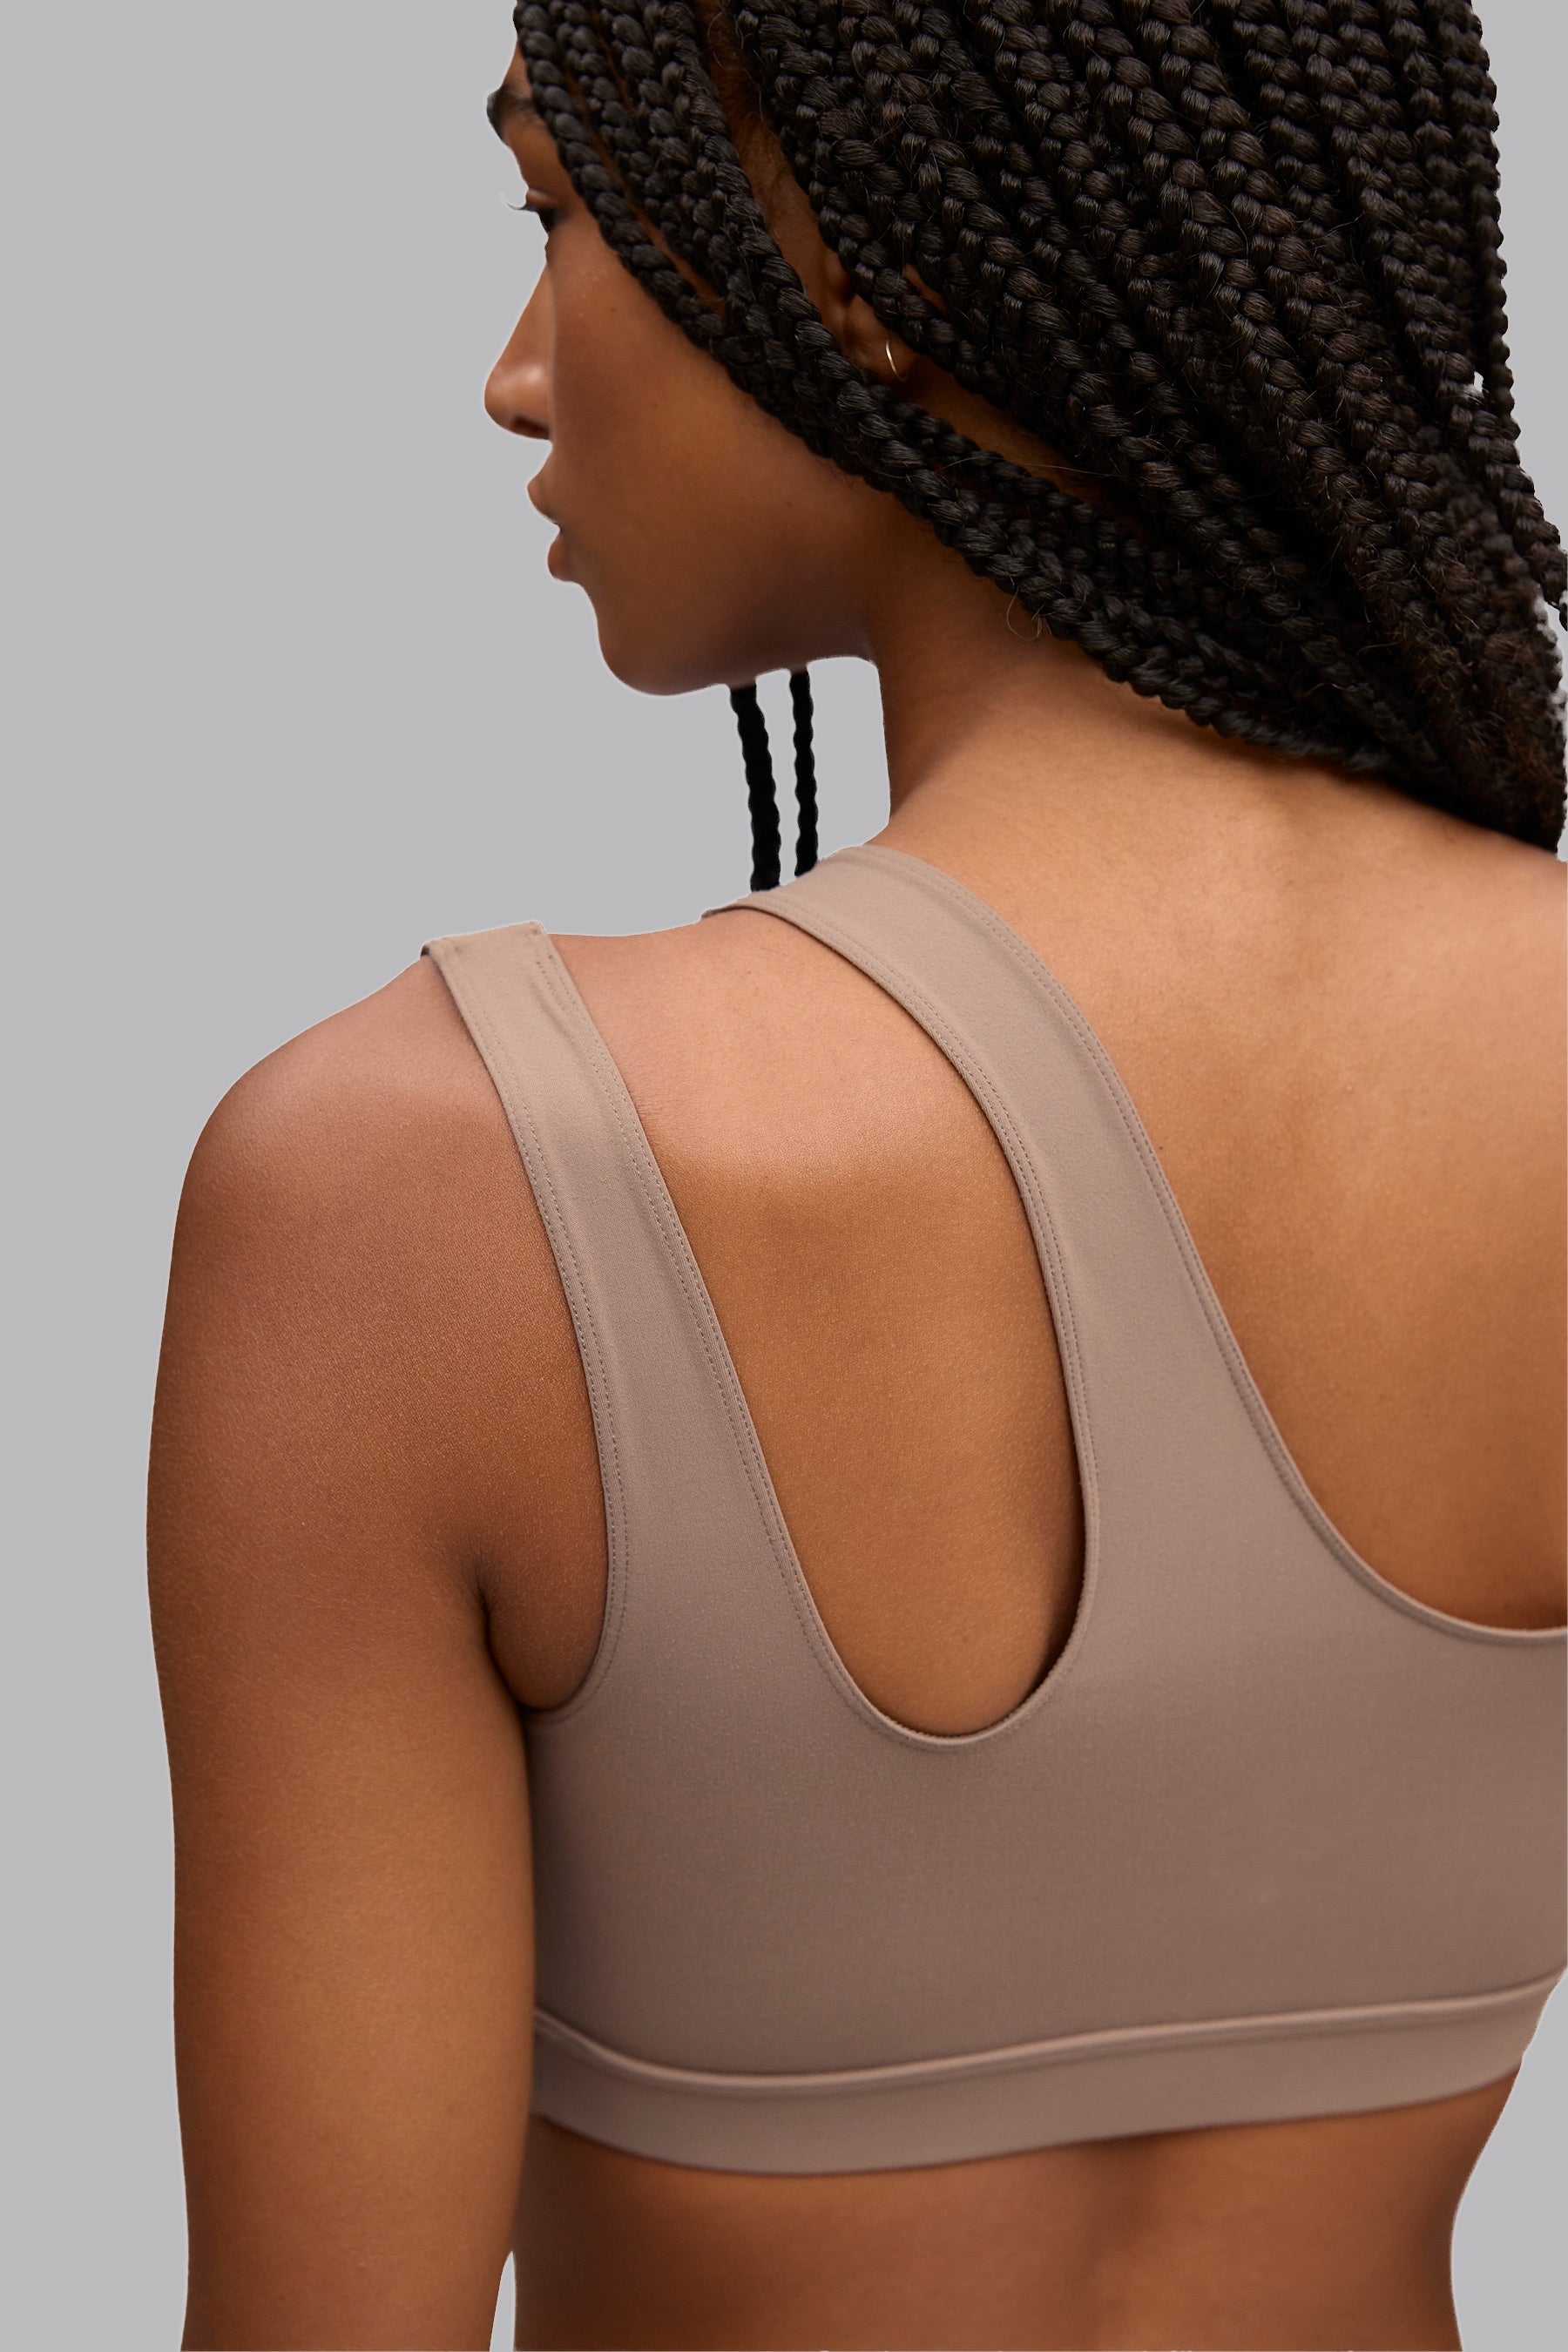 Breathable Womens Beige Sports Bra With Strong Elasticity, Hollow Out  Design, And Slim Fit Straps From Malewardrobe, $13.95